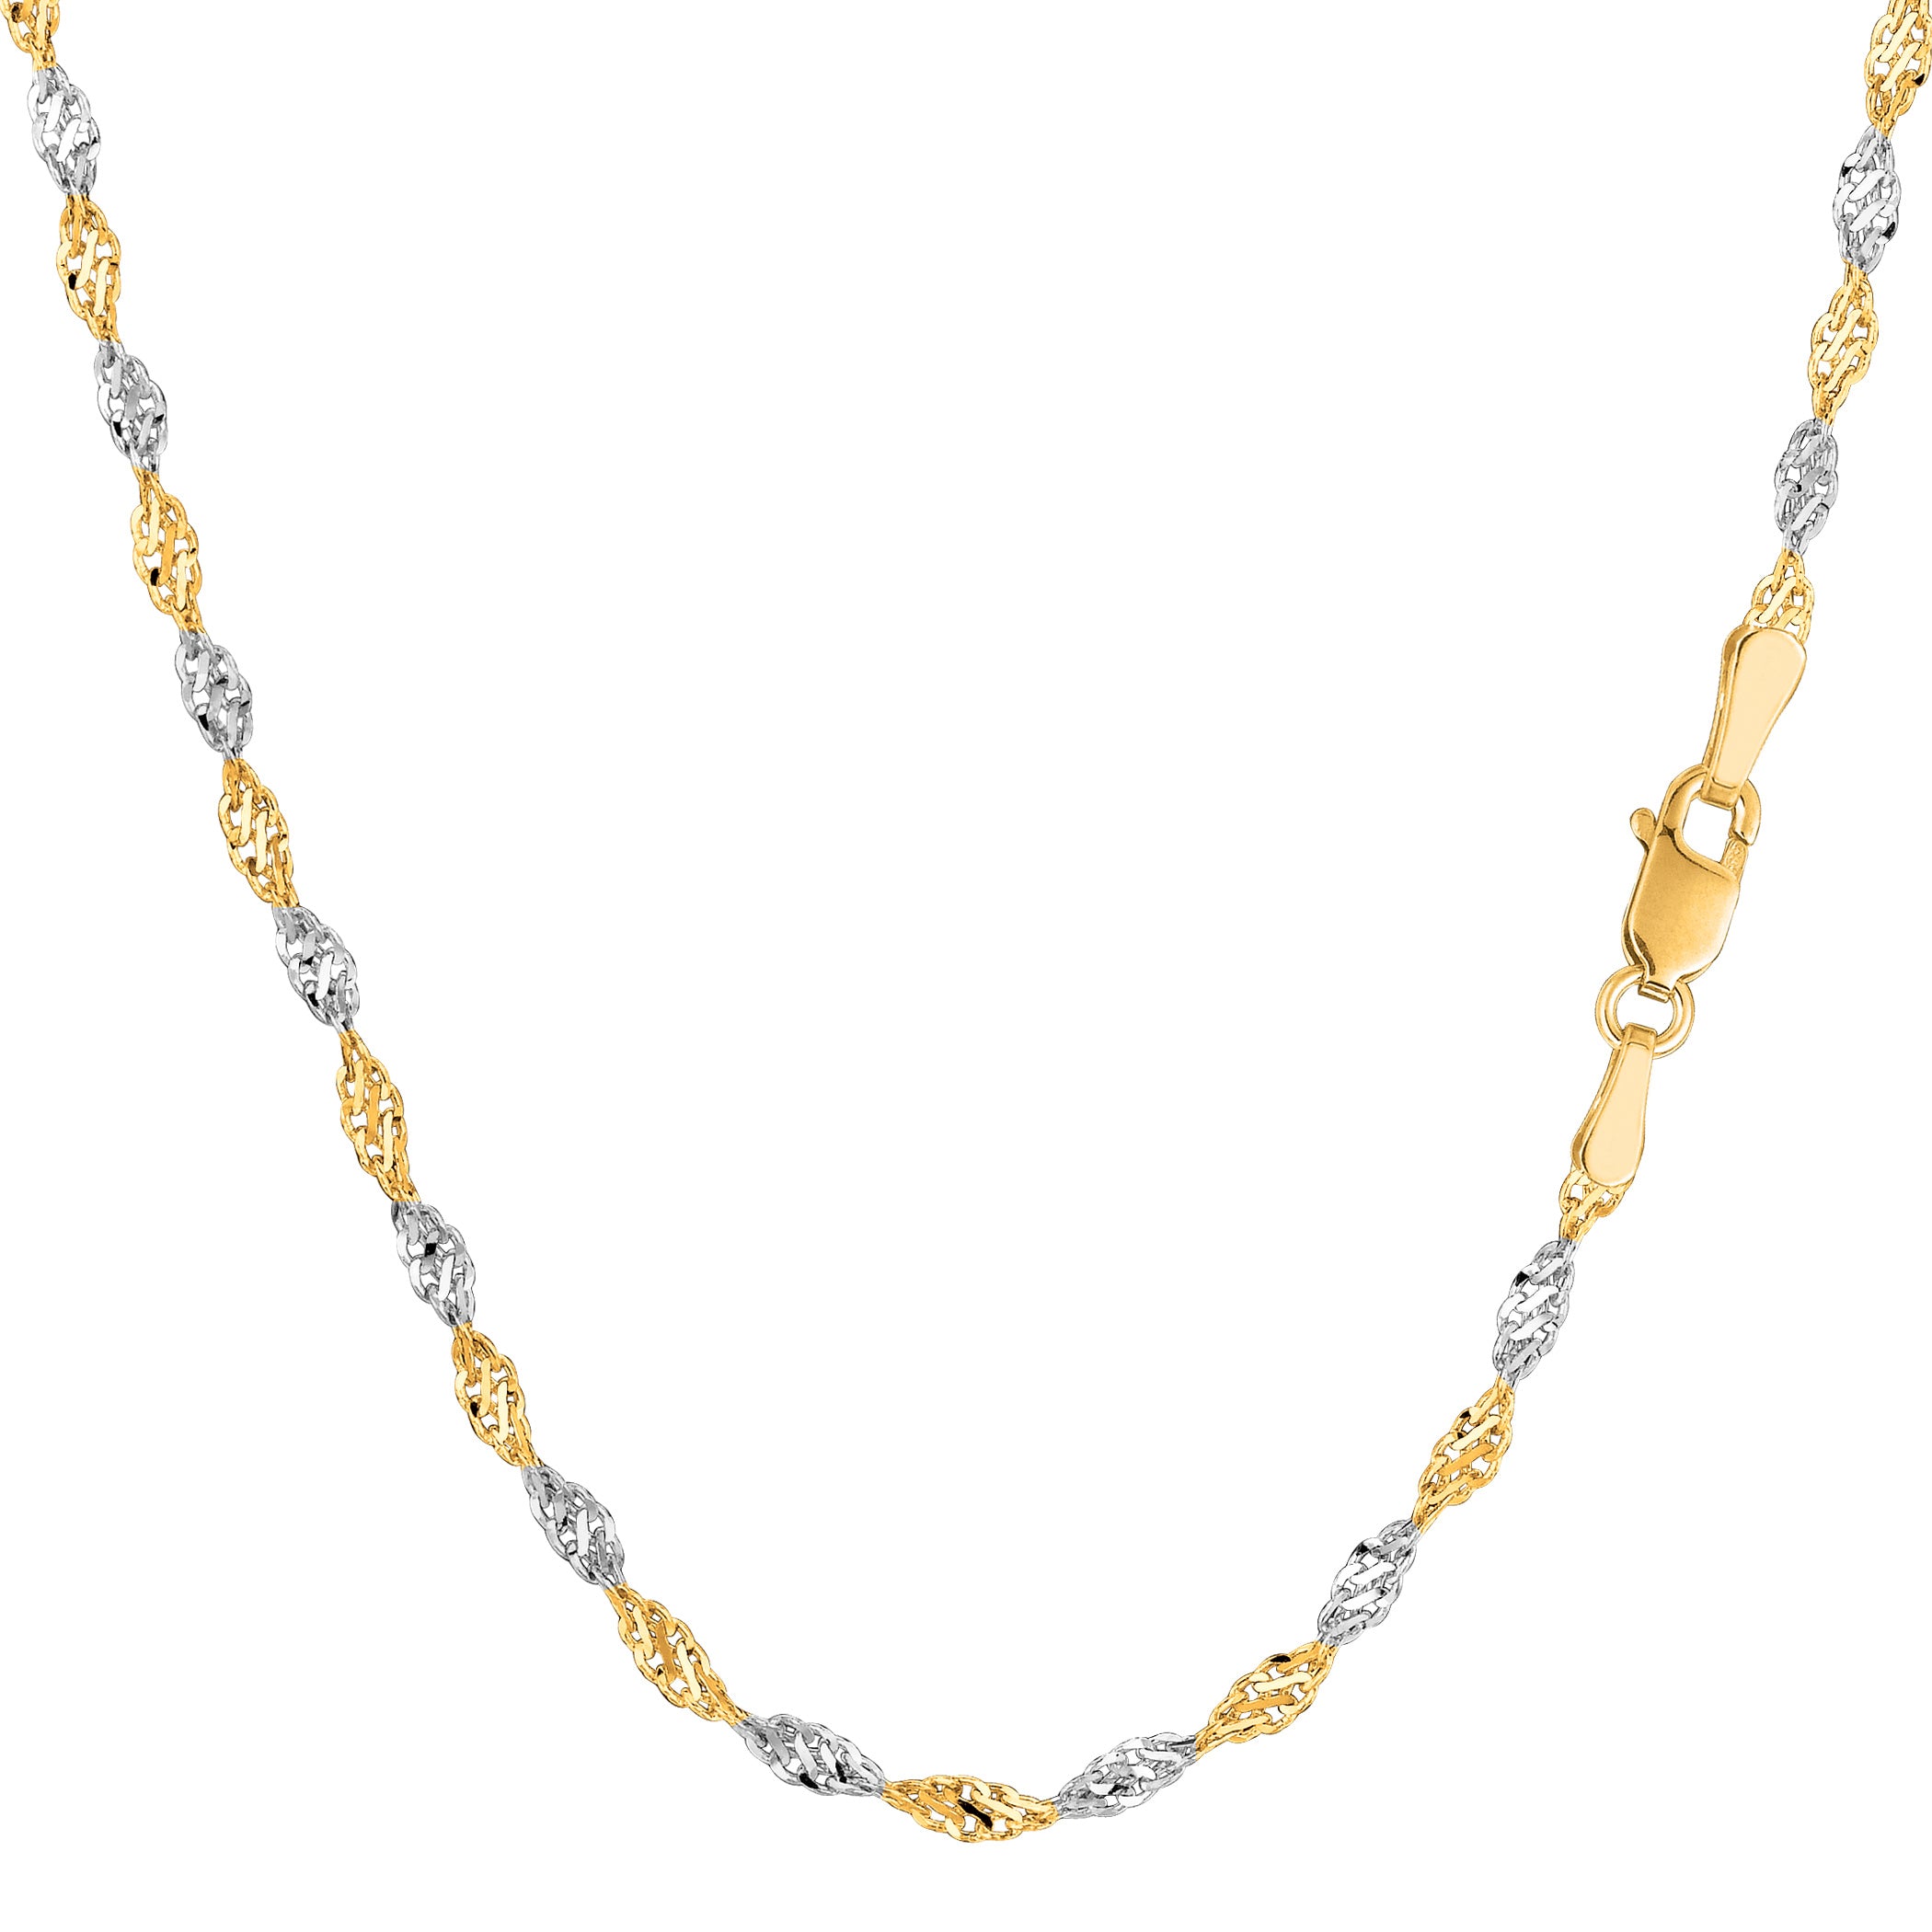 14k 2 Tone Yellow And White Gold Singapore Chain Necklace, 2.0mm